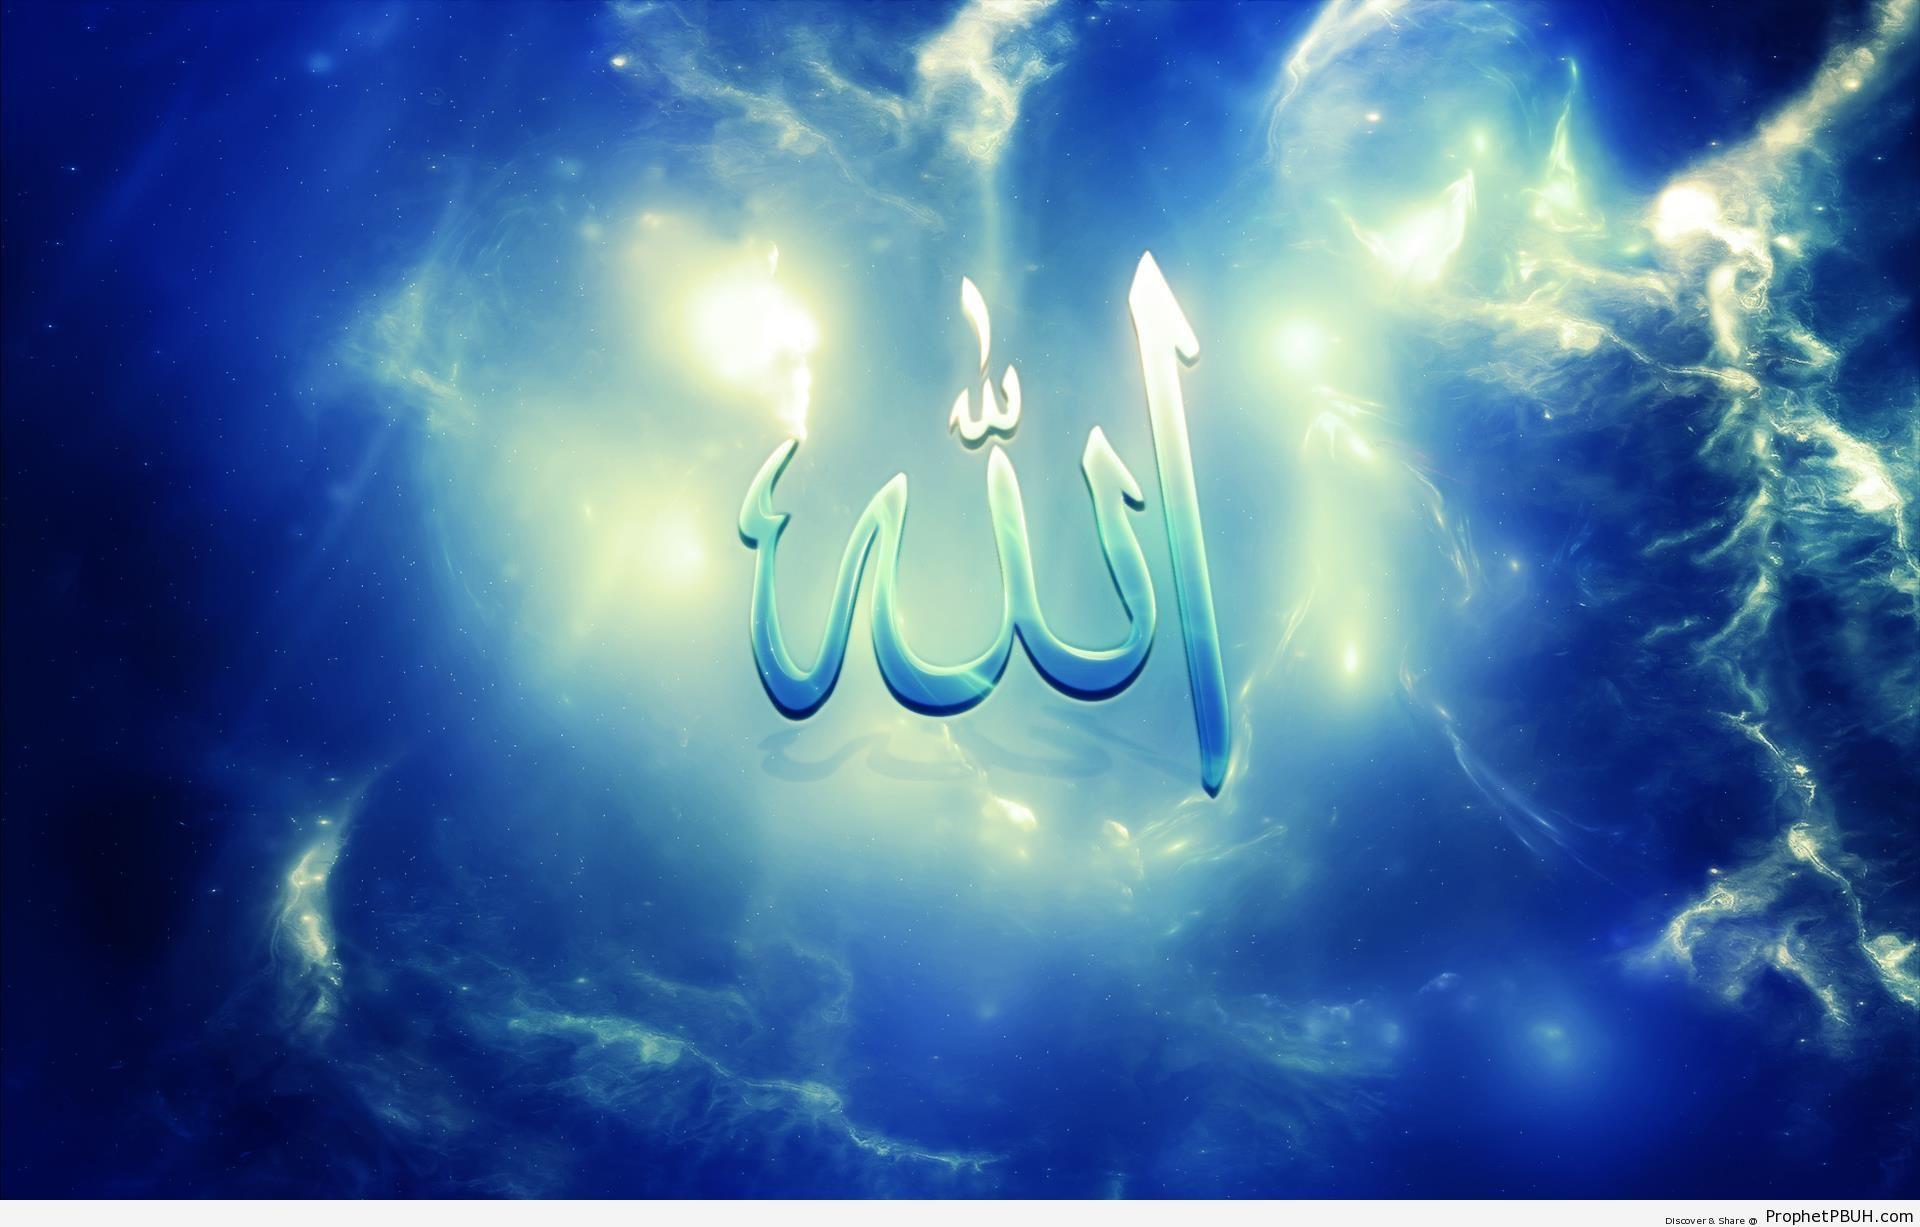 Allah Live Wallpaper Android Apps on Google Play. Wallpaper 4k